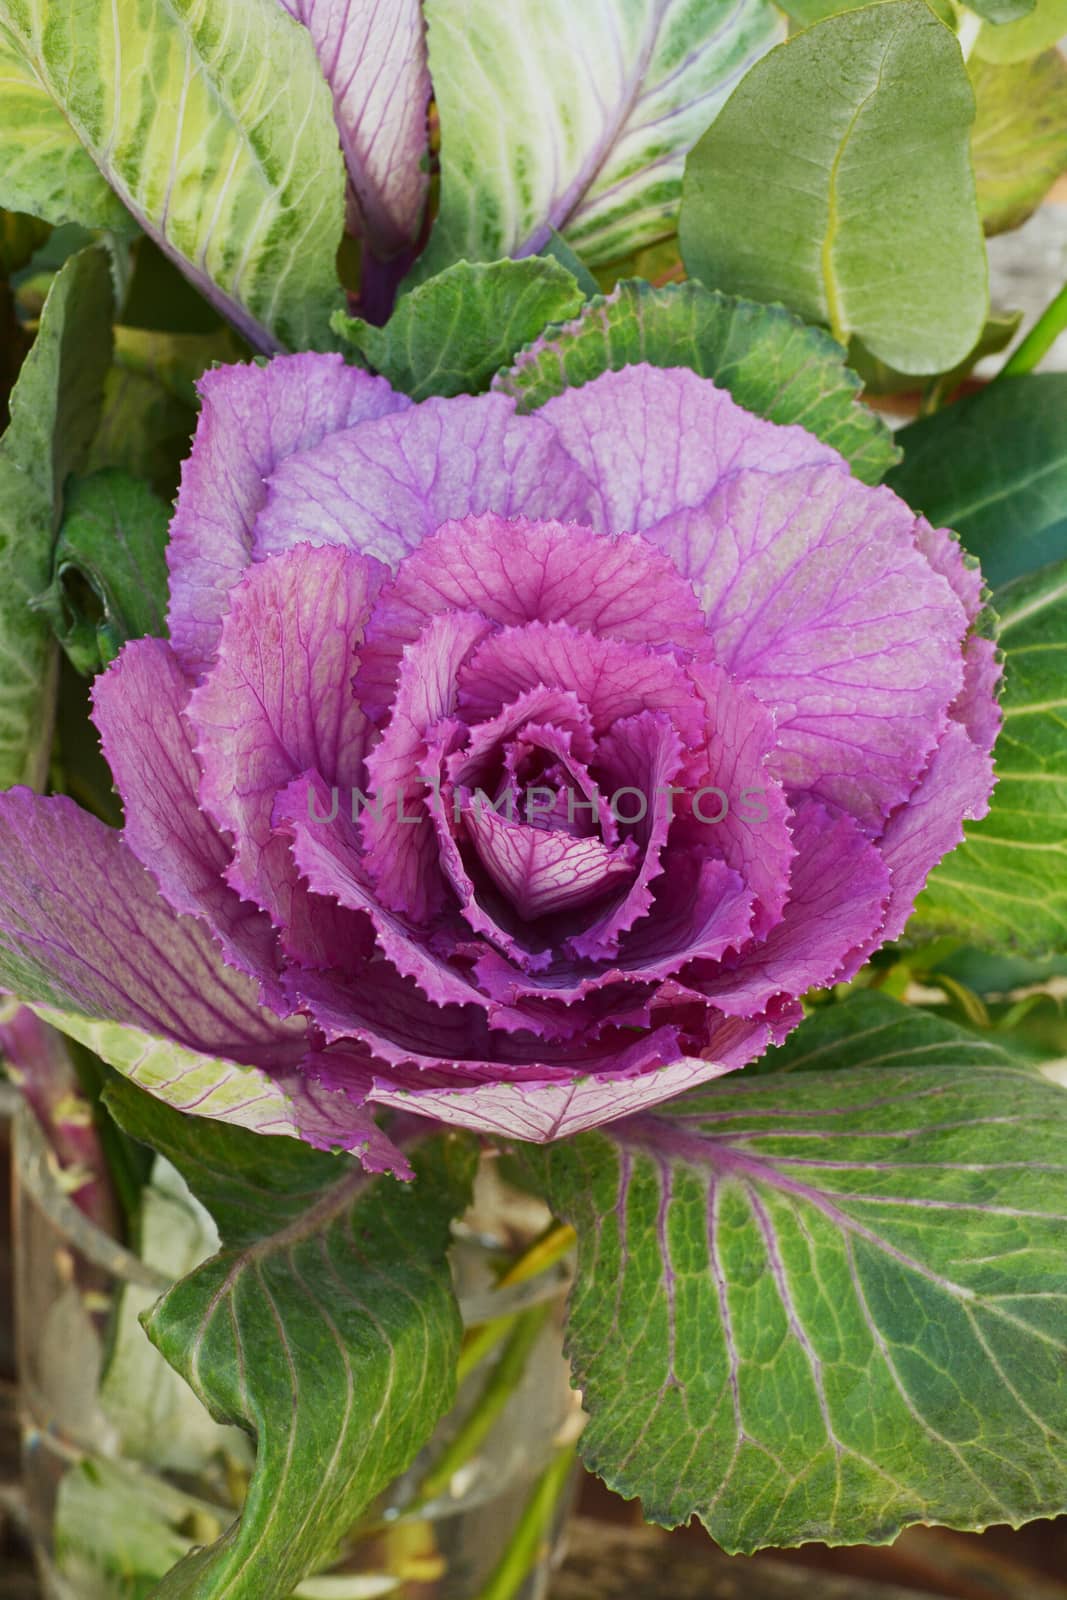 Head of ornamental cabbage with purple and green leaves for a brassica flower arrangement